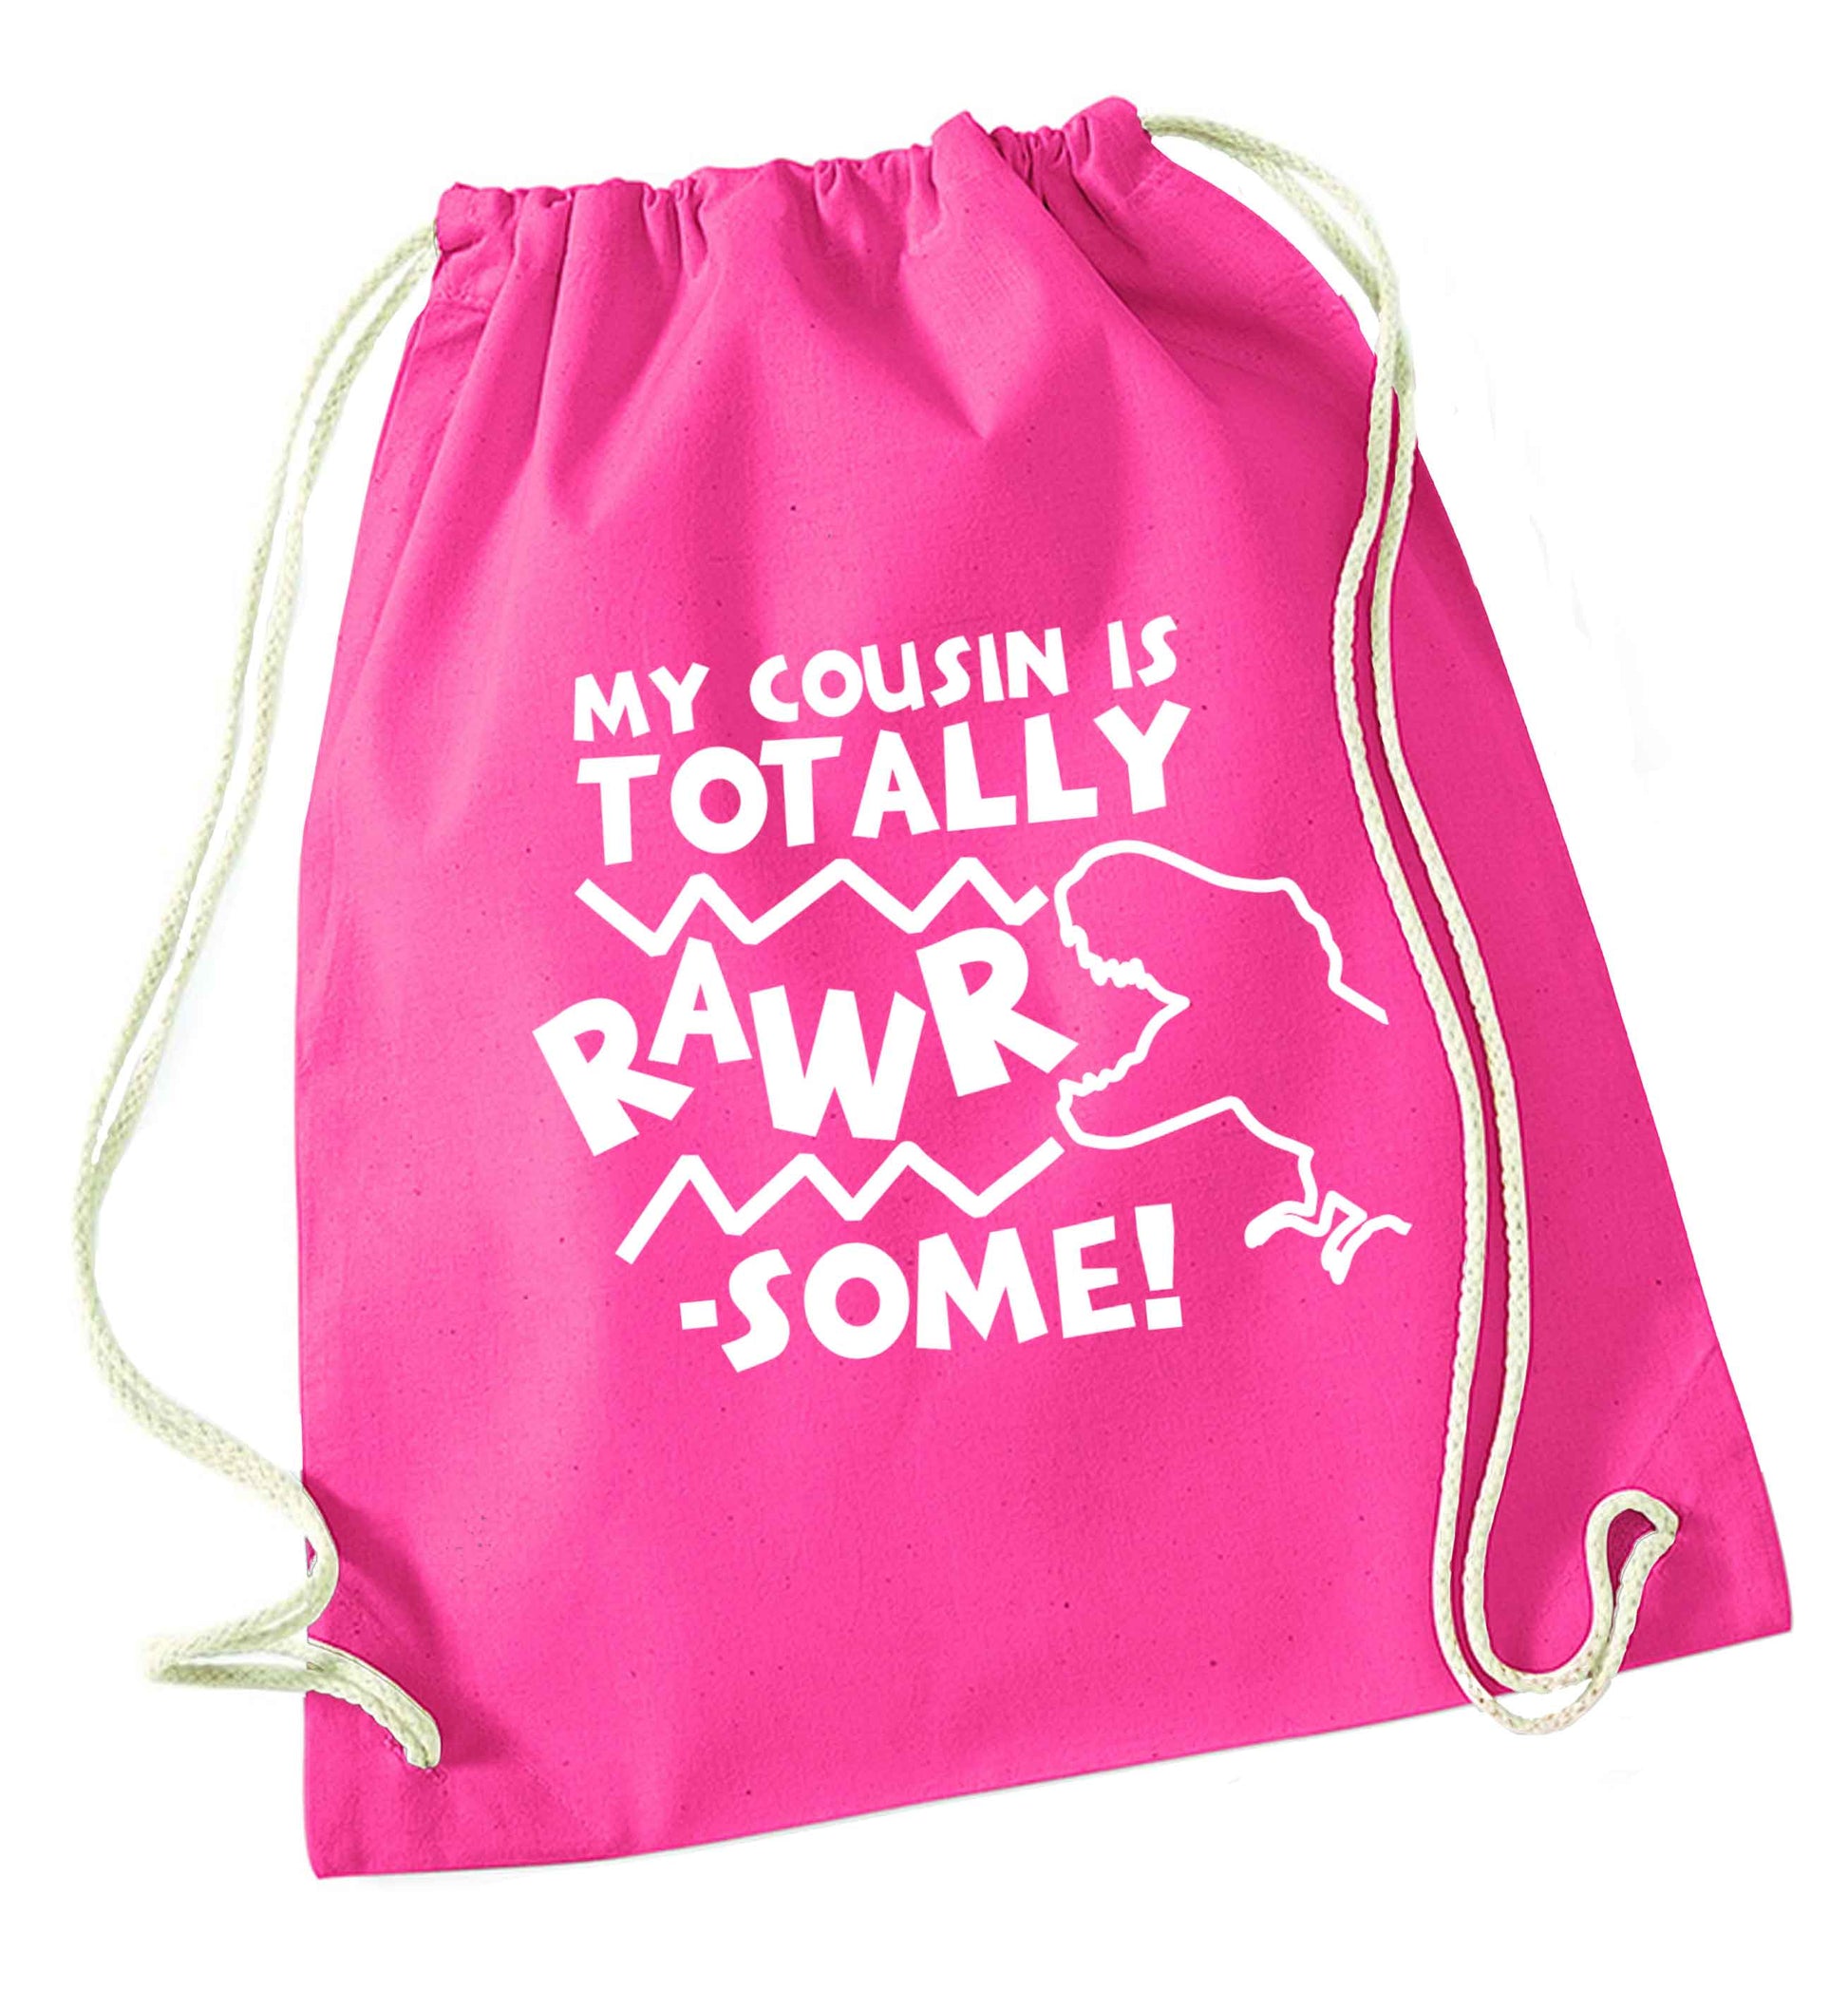 My cousin is totally rawrsome pink drawstring bag